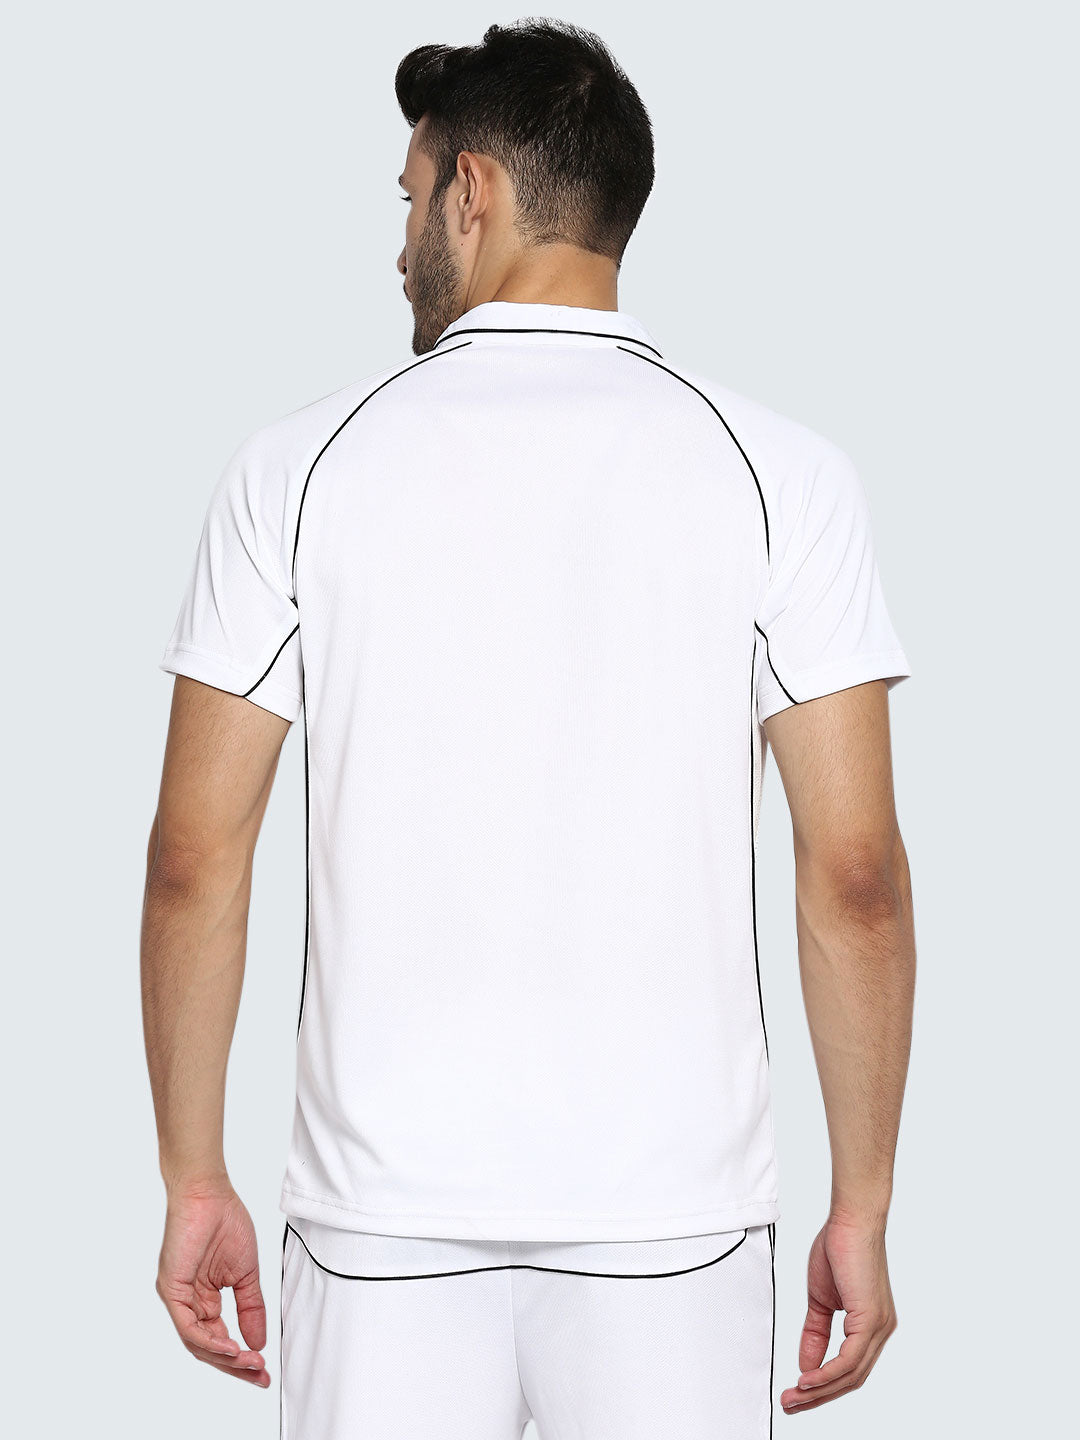 Men's Cricket Whites Short Sleeve Polo T-Shirt With Trim - Front